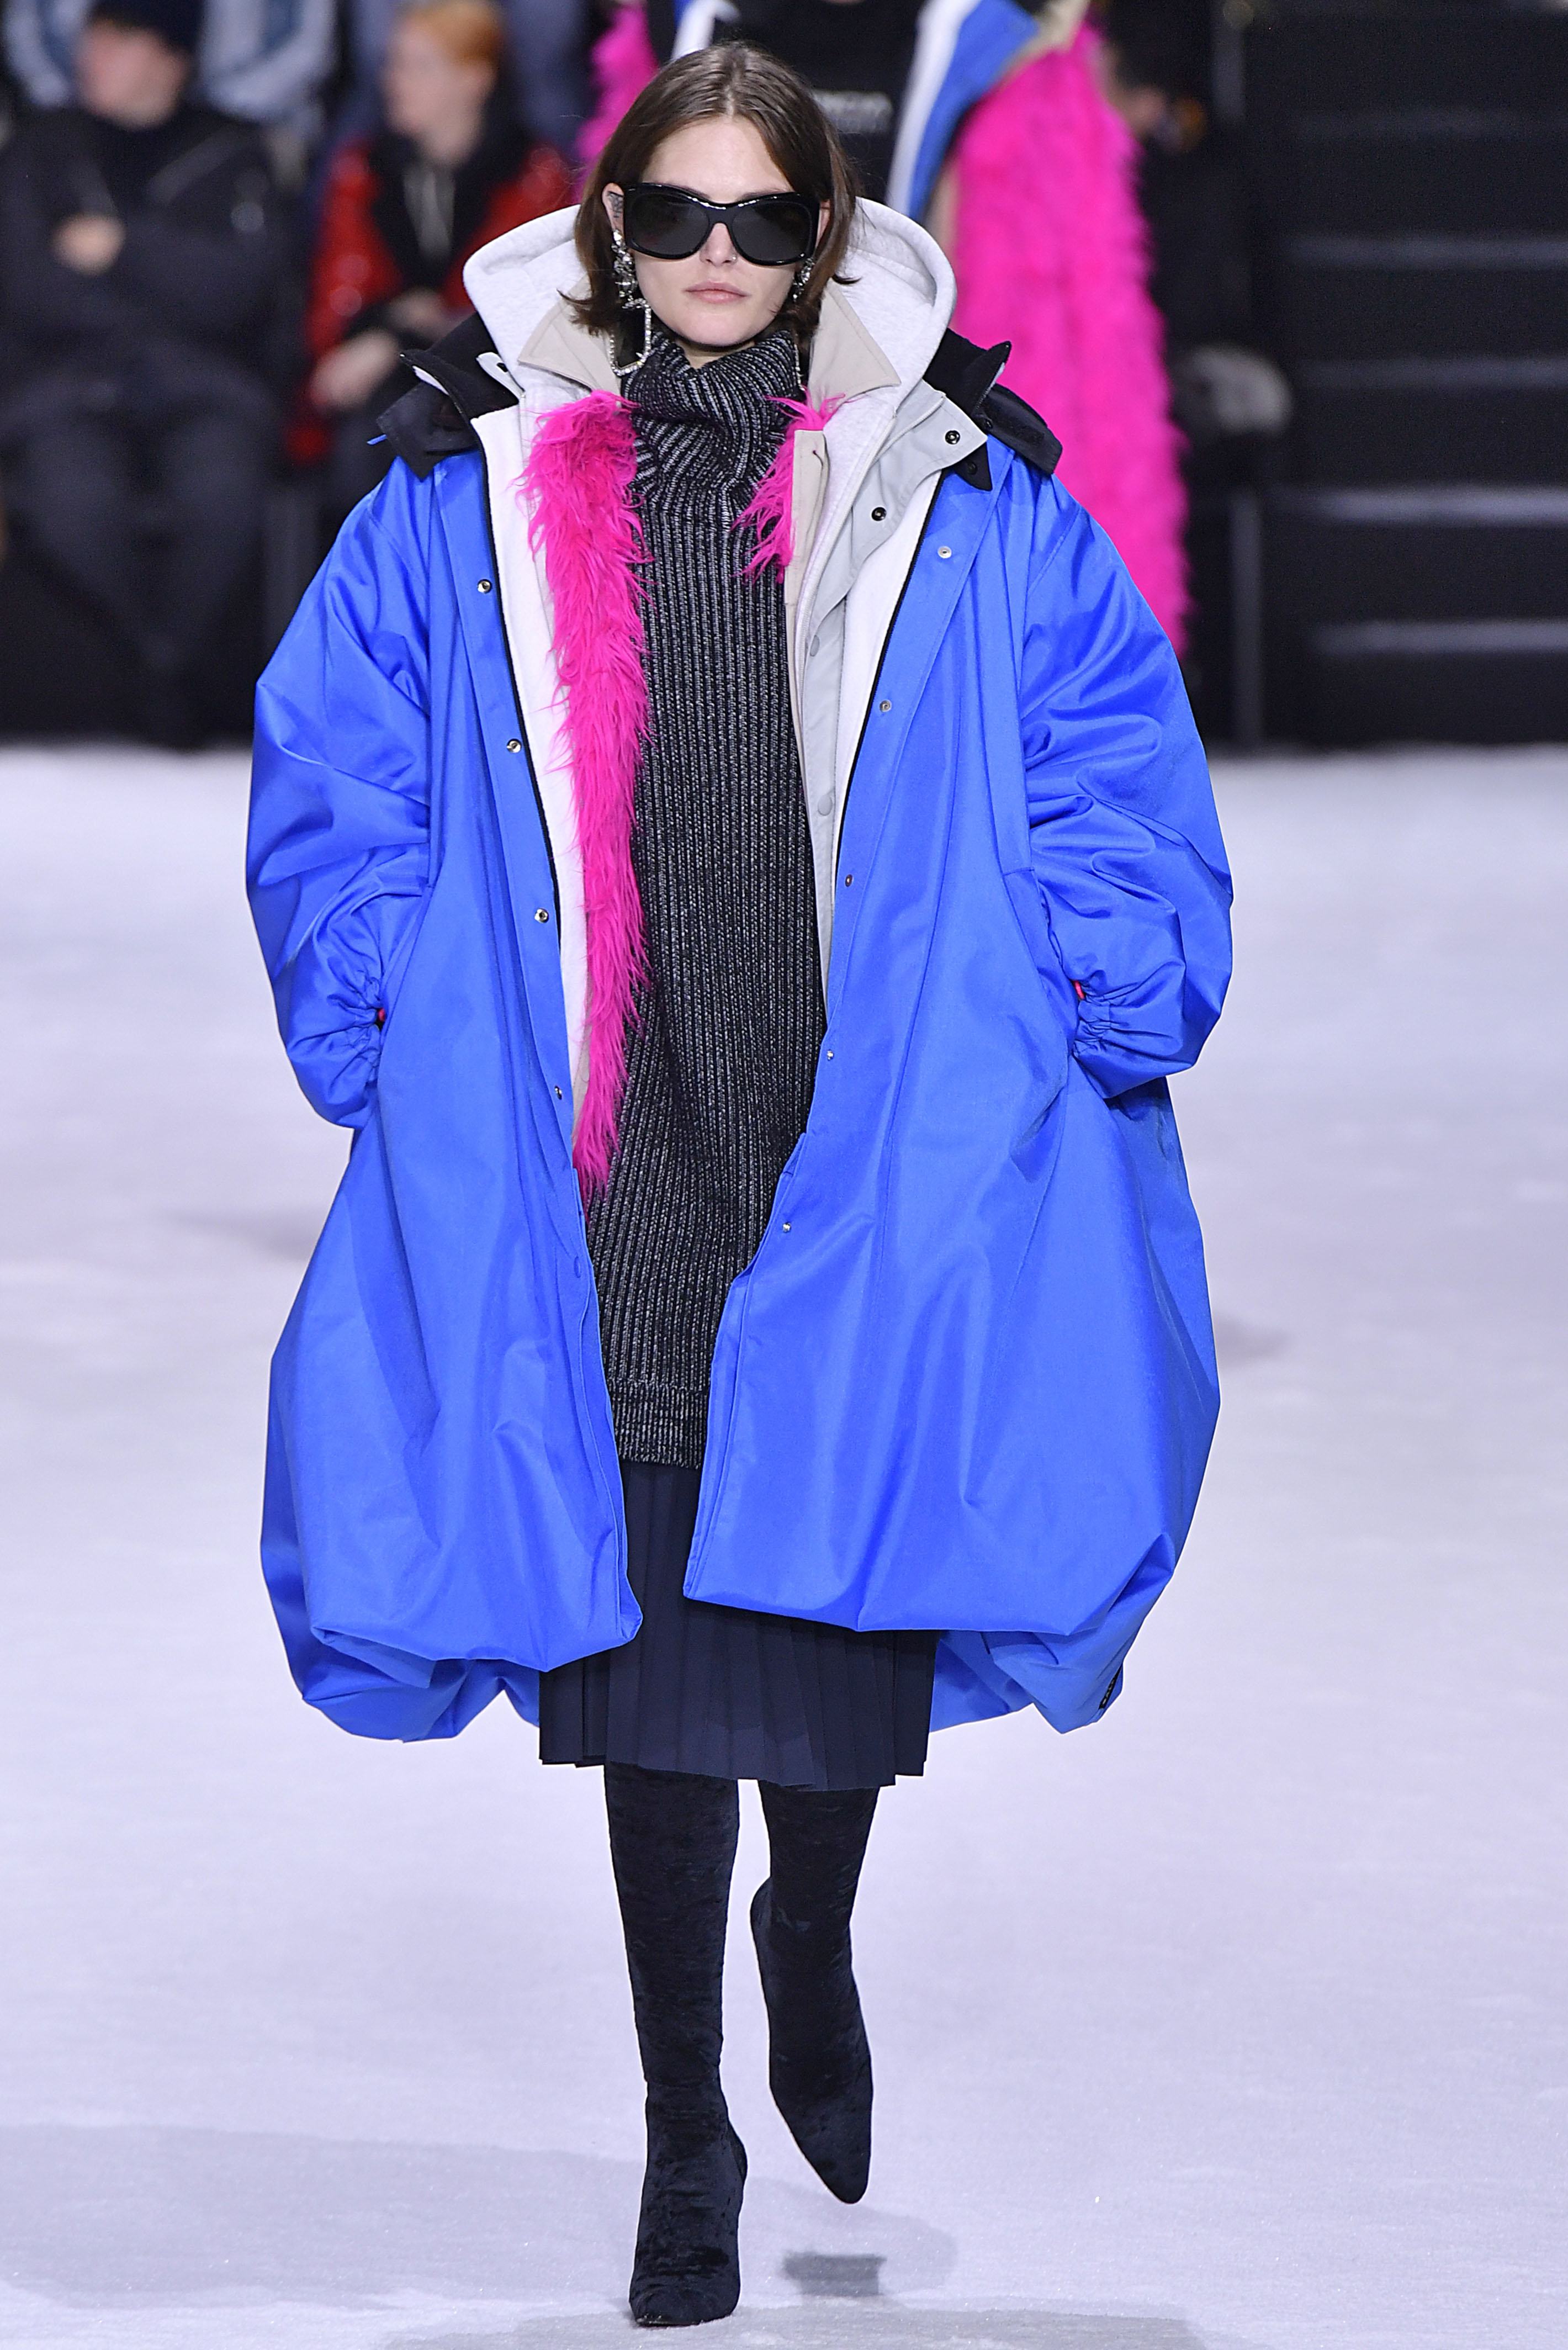 How Demna Gvasalia’s Giant Puffers Were an Awesome Homage to Cristobal ...